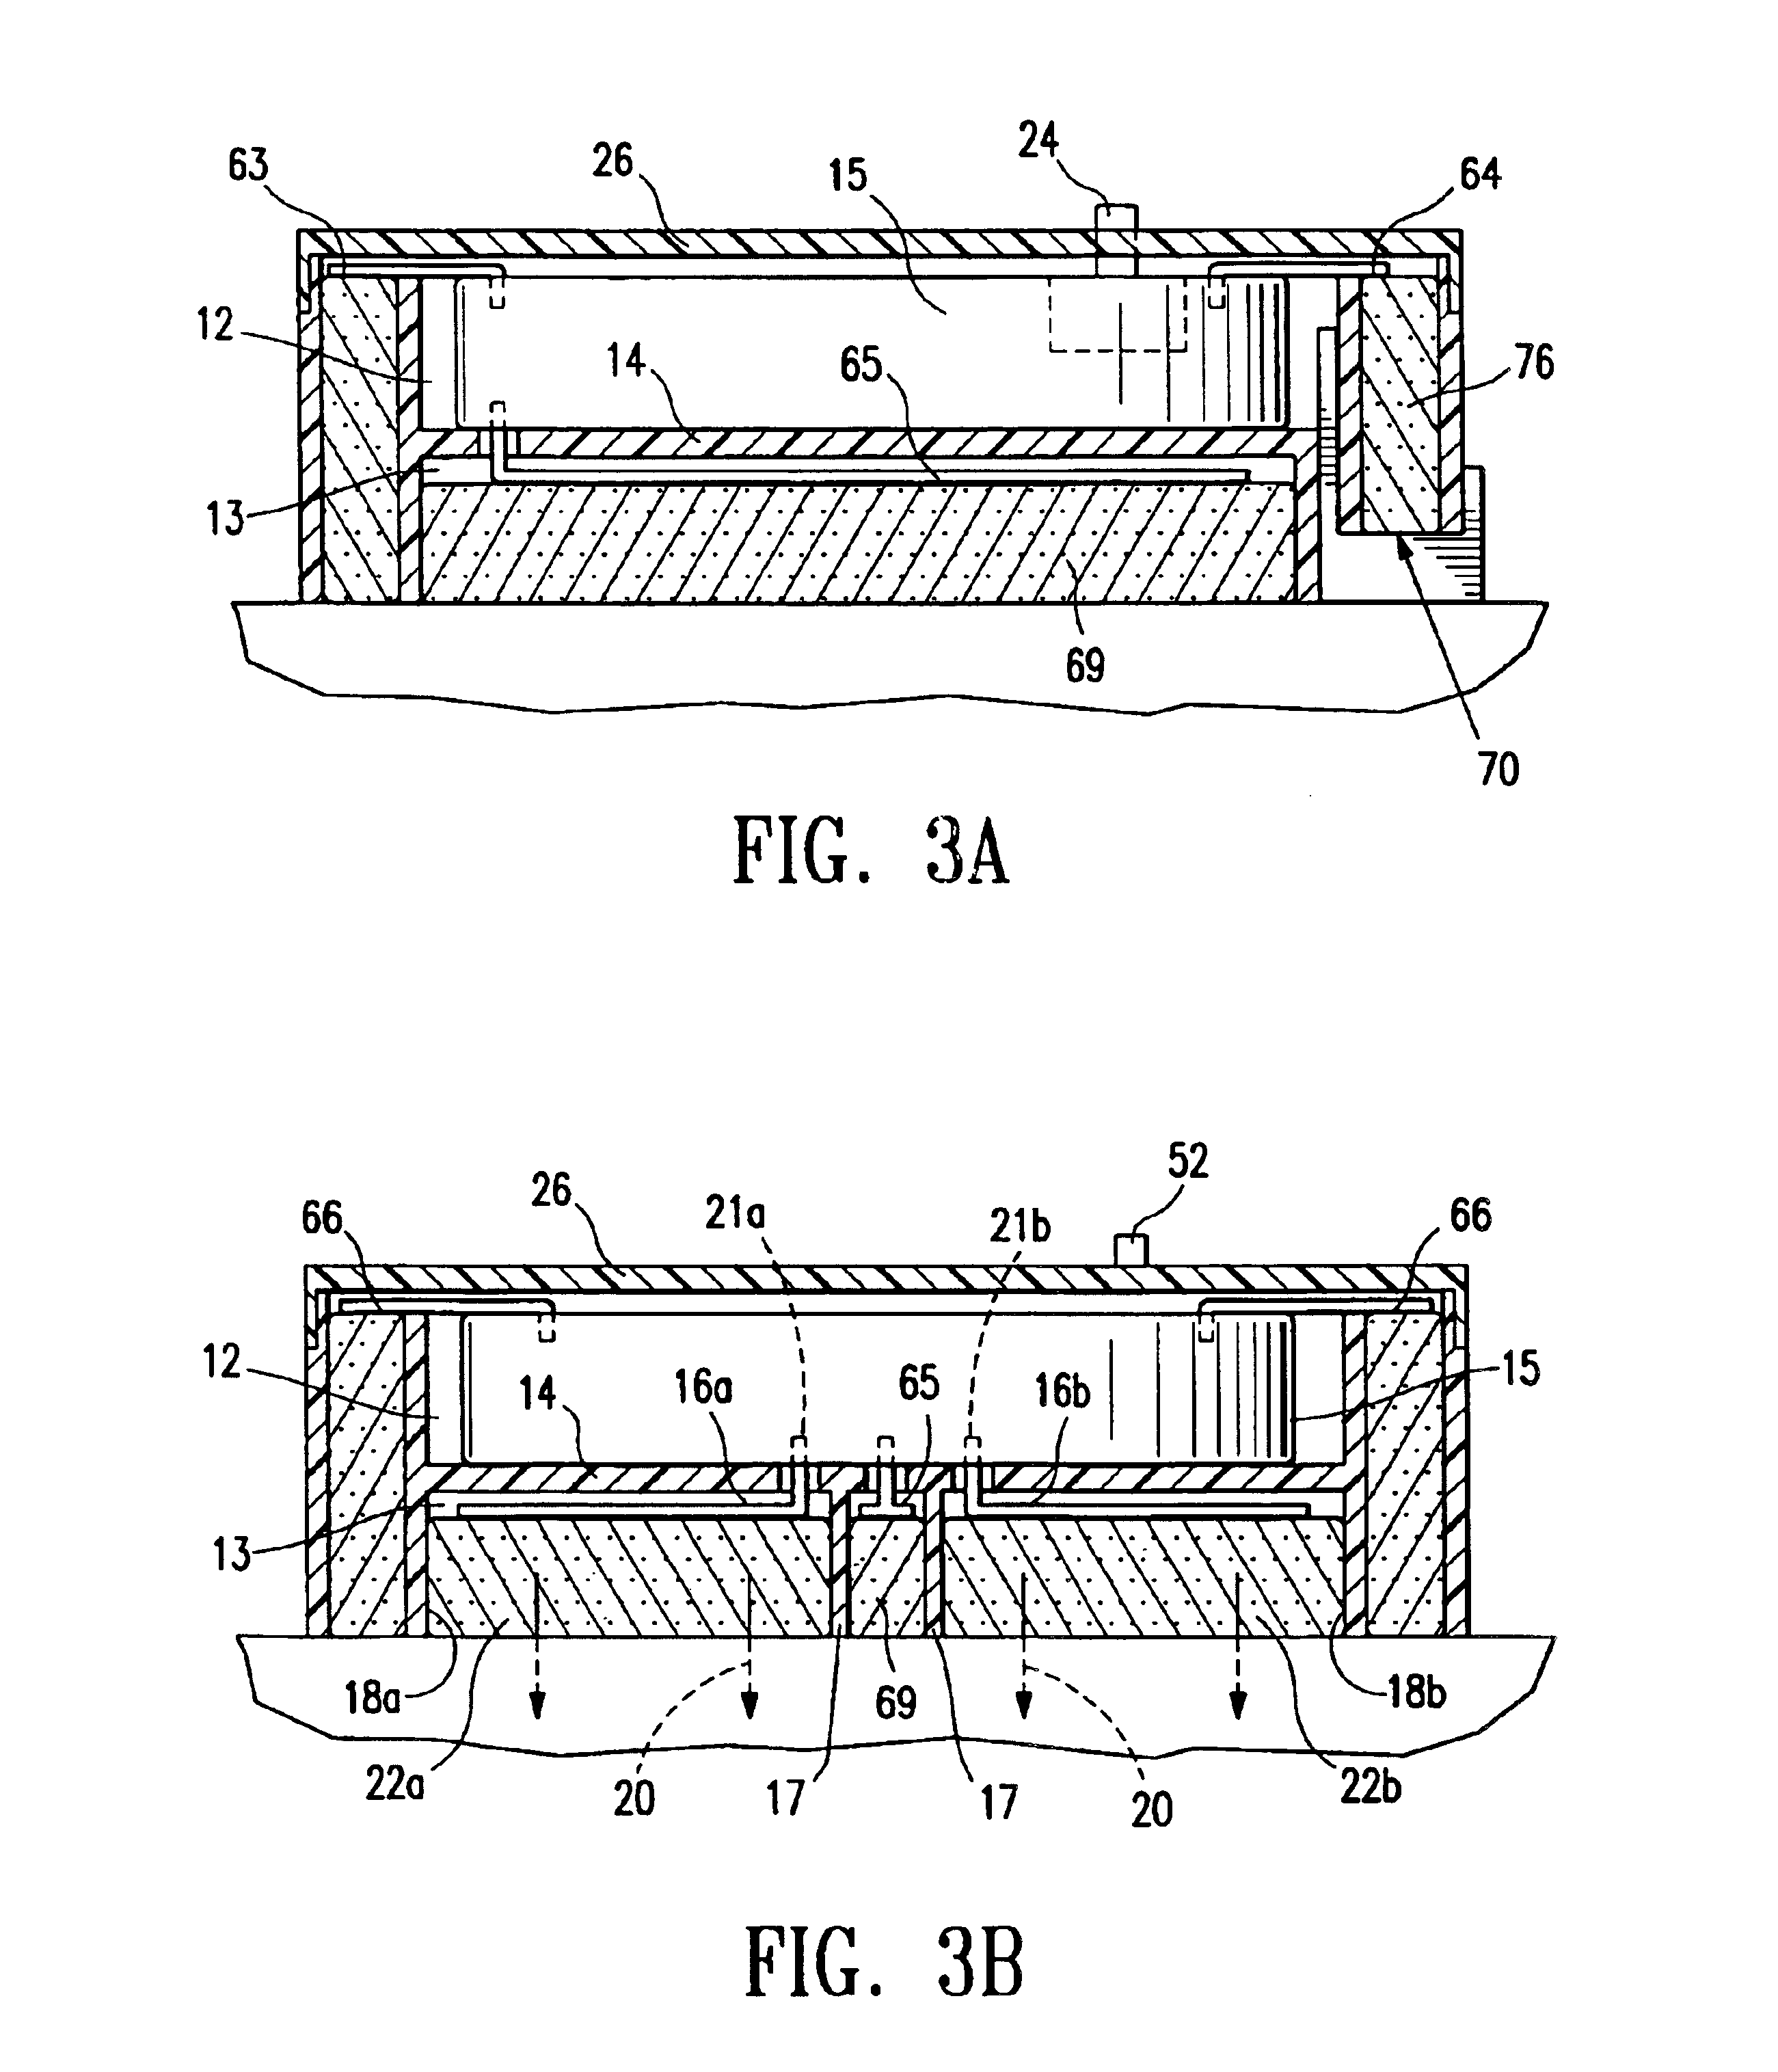 Sensor controlled analysis and therapeutic delivery system